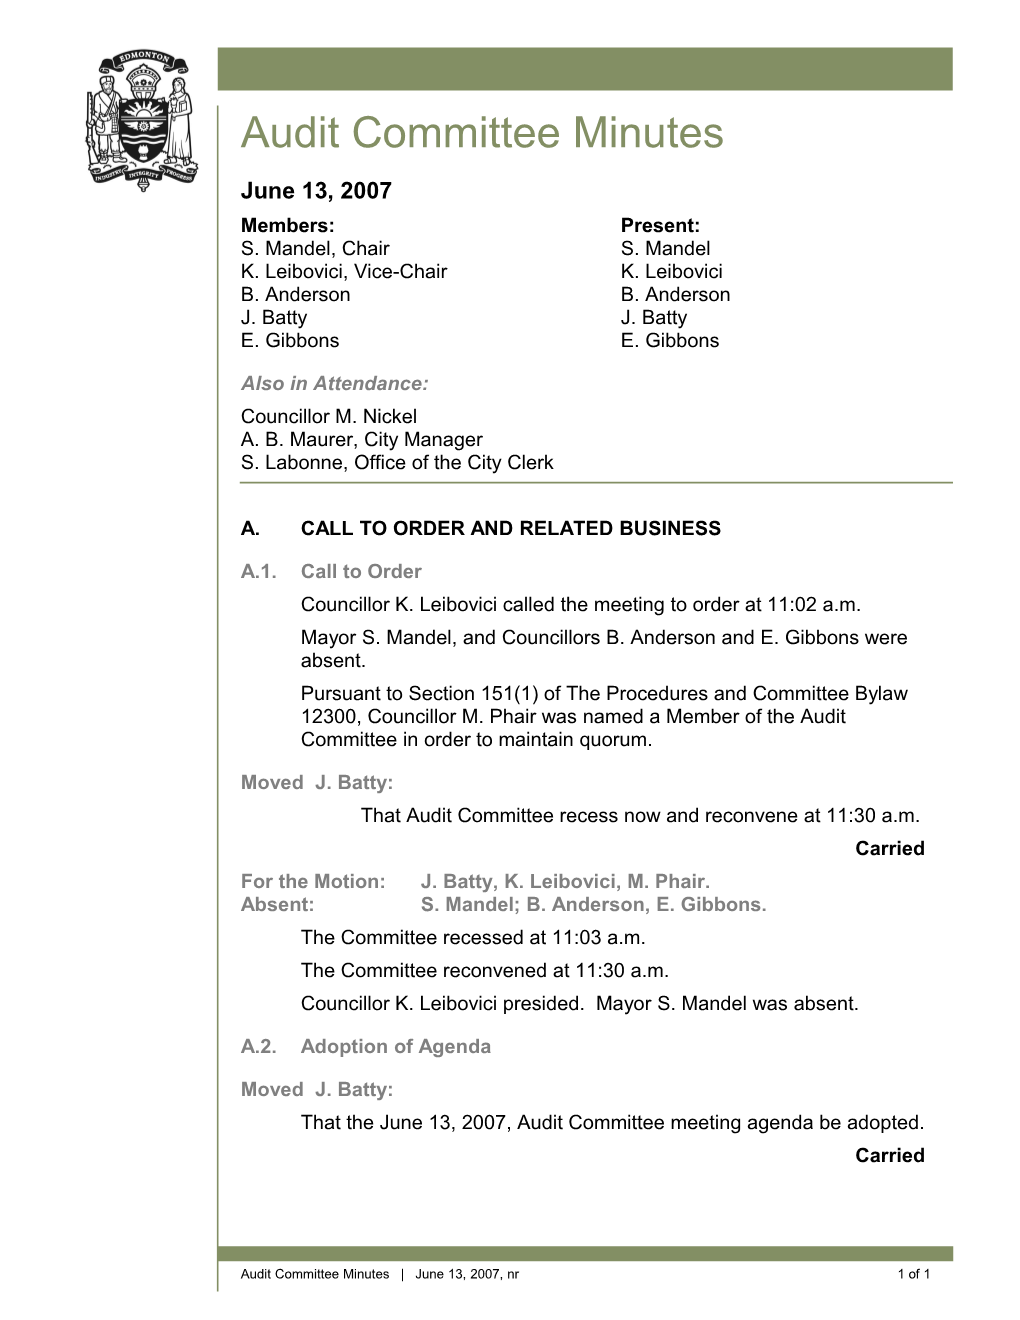 Minutes for Audit Committee June 13, 2007 Meeting